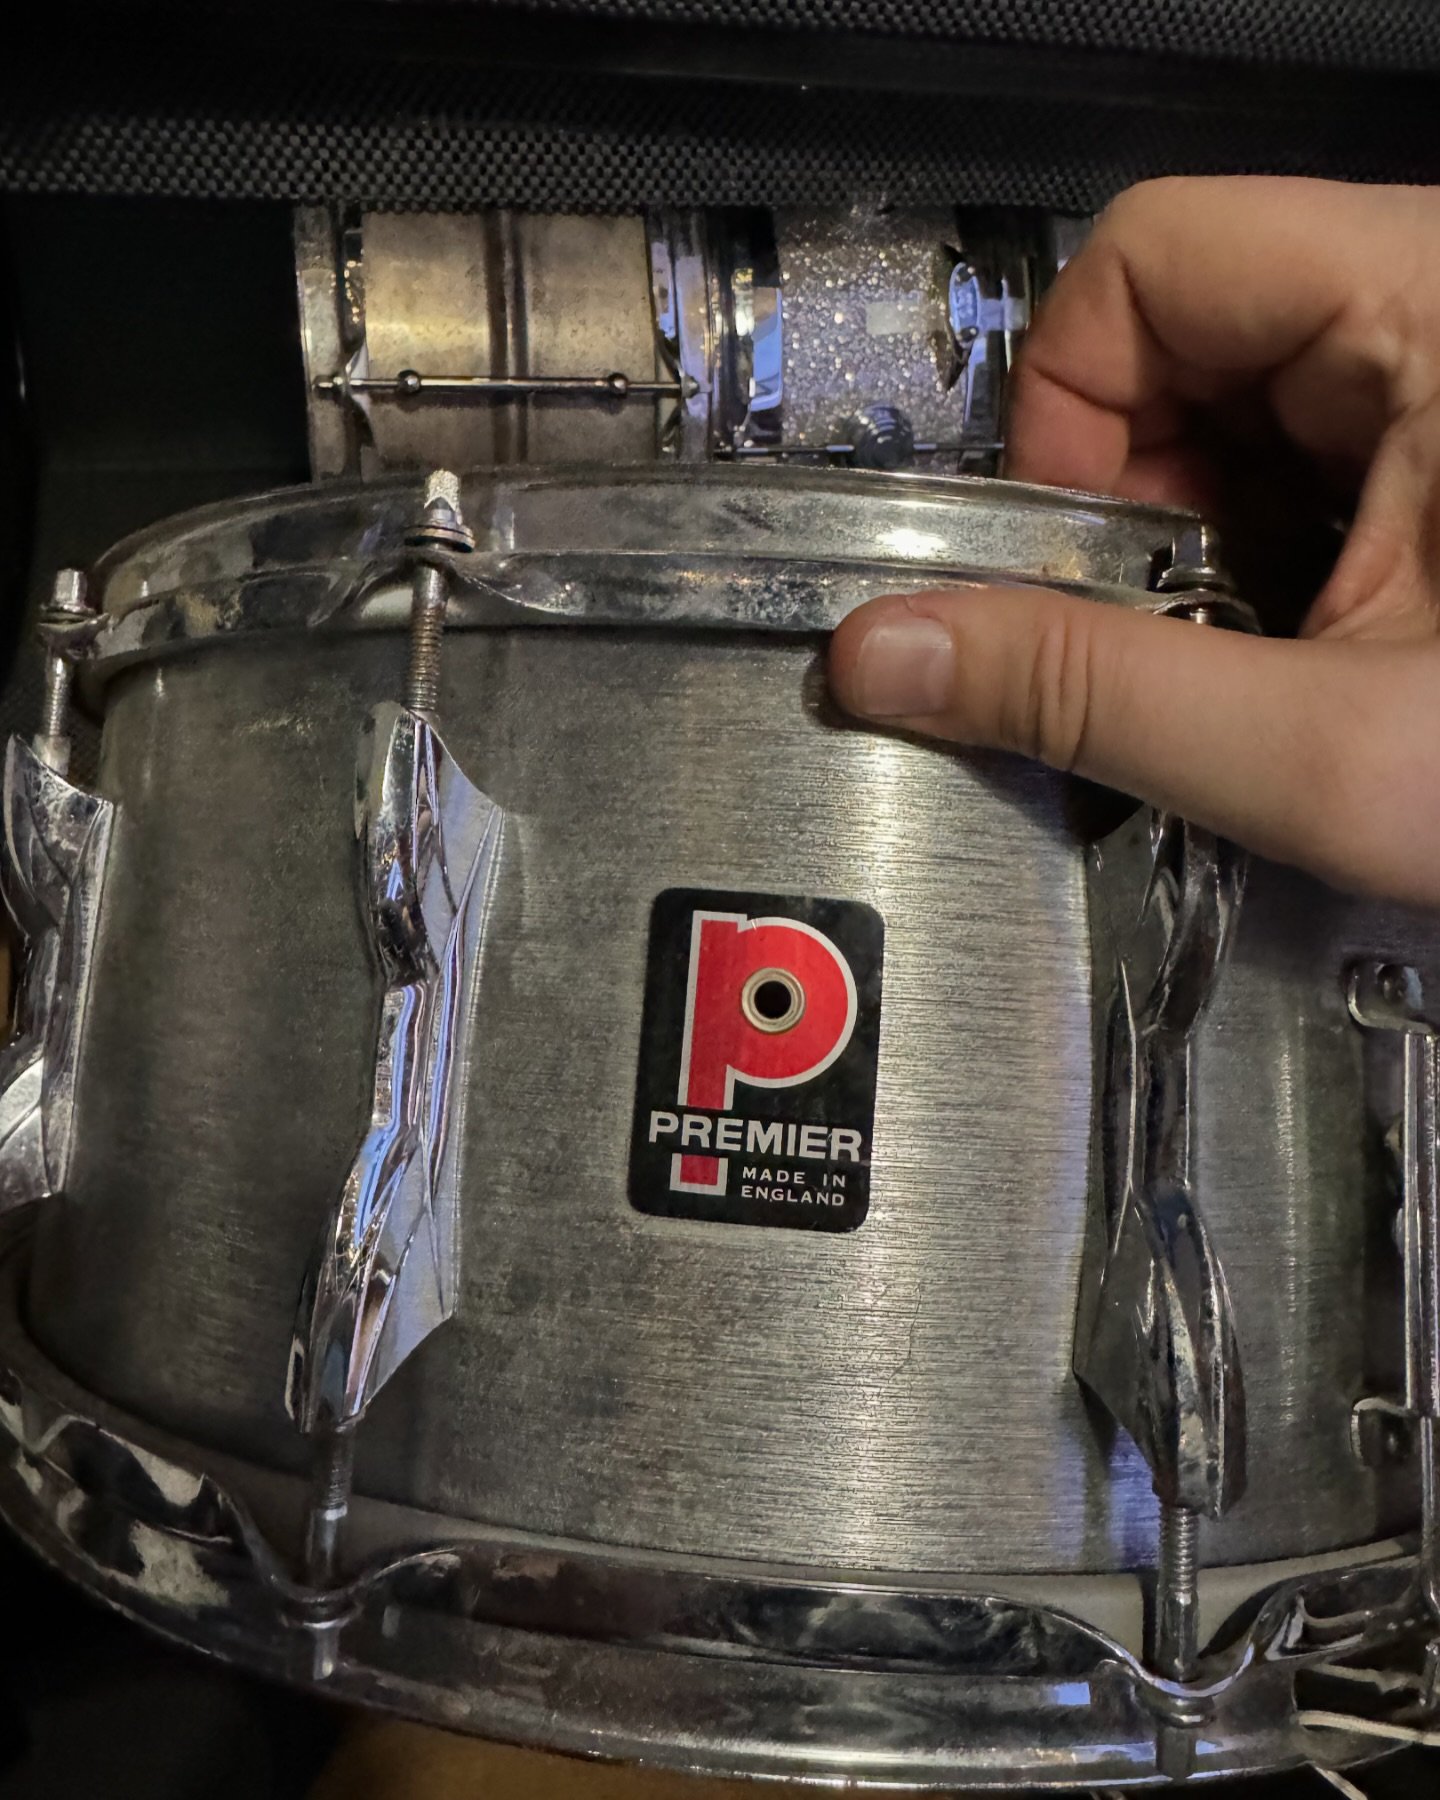 I never use this snare, I&rsquo;ve had it for over a decade and it&rsquo;s been on only a handful of songs. It sounds great, just not my first or second call for a track. Give me ideas internet! Sell it? New heads? Target practice? I like for things 